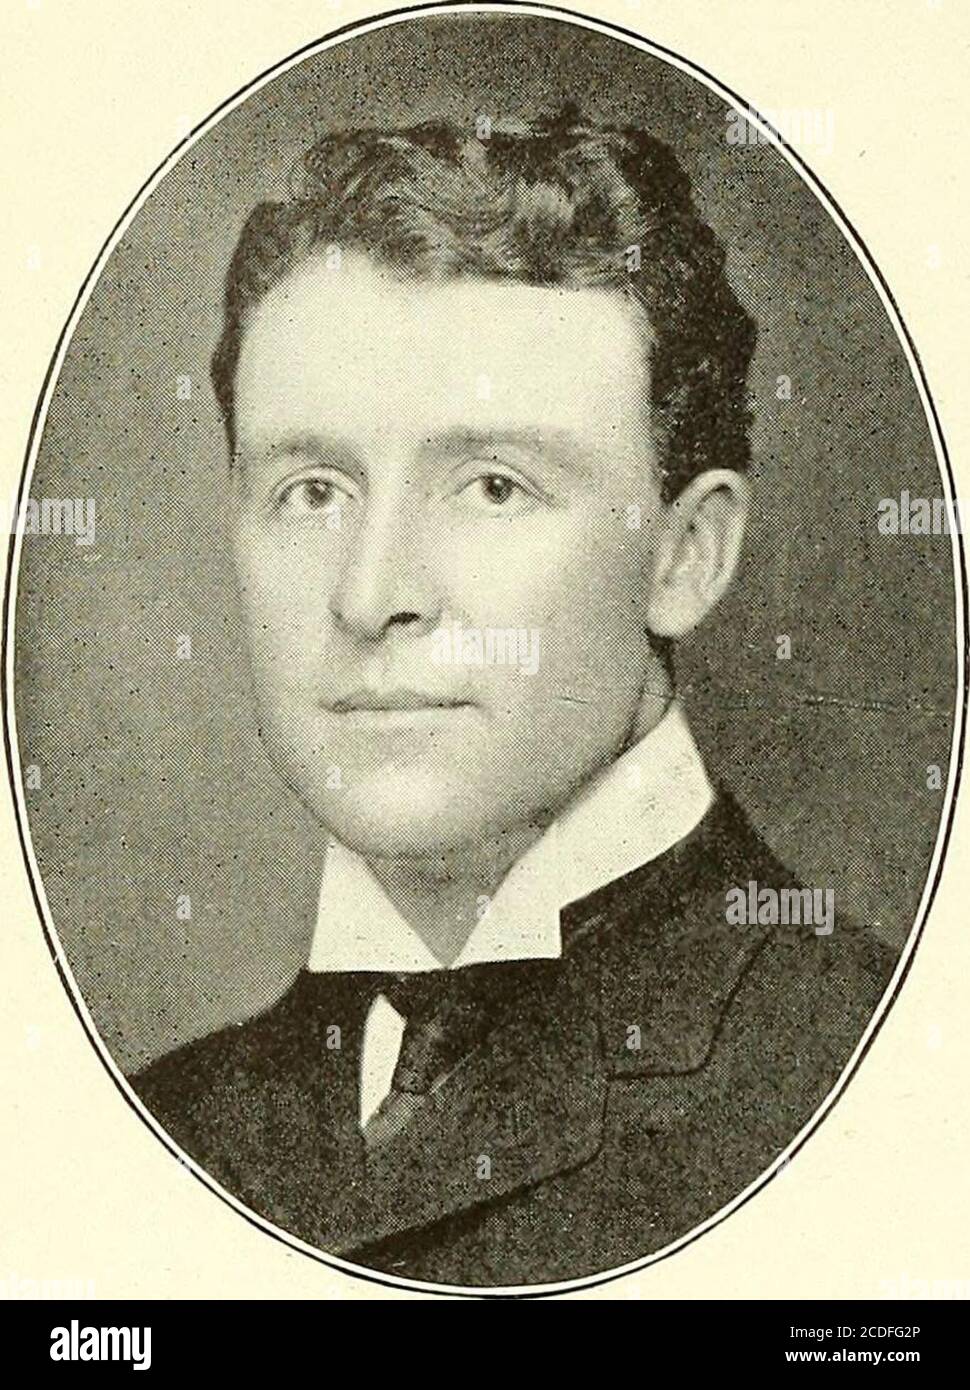 . Men of Minnesota; a collection of the portraits of men prominent in business and professional life in Minnesota . CHARLES S. HULBERT MINNEAPOLIS.CITY TREAS. VICE PRES. SWED. AM. NATL BANK. JOSHUA ROGERS MINNEAPOLIS.CITY COMPTROLLER (1900—). 50 MEN OF MINNESOTA.. Stock Photo